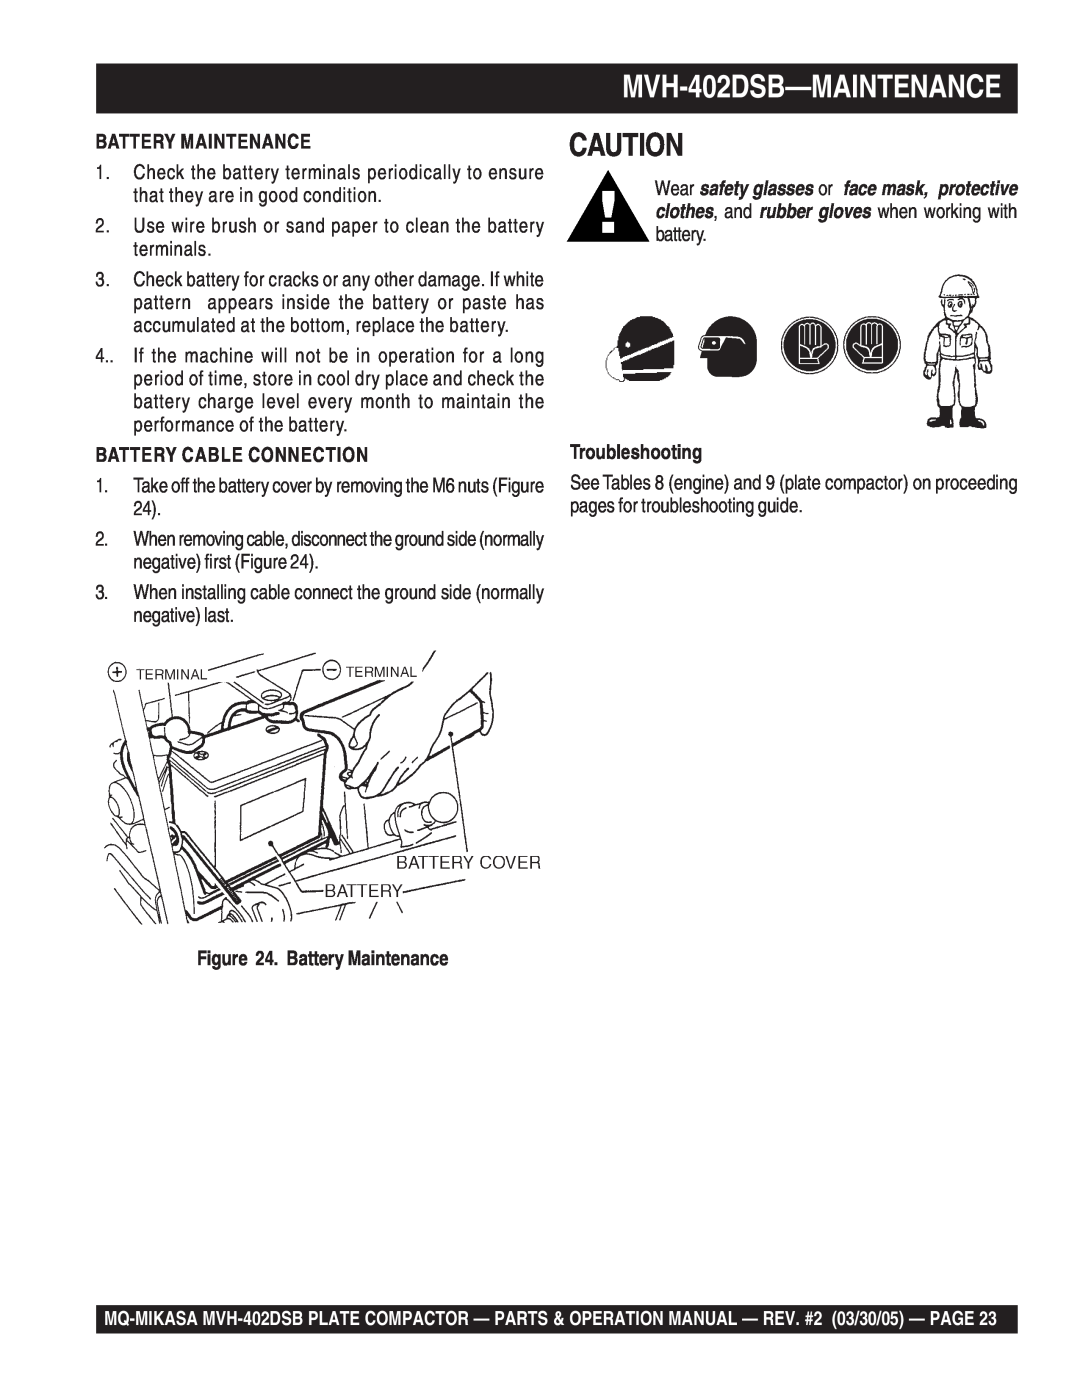 Multiquip manual MVH-402DSB-MAINTENANCE, Battery Maintenance, Battery Cable Connection, Troubleshooting 